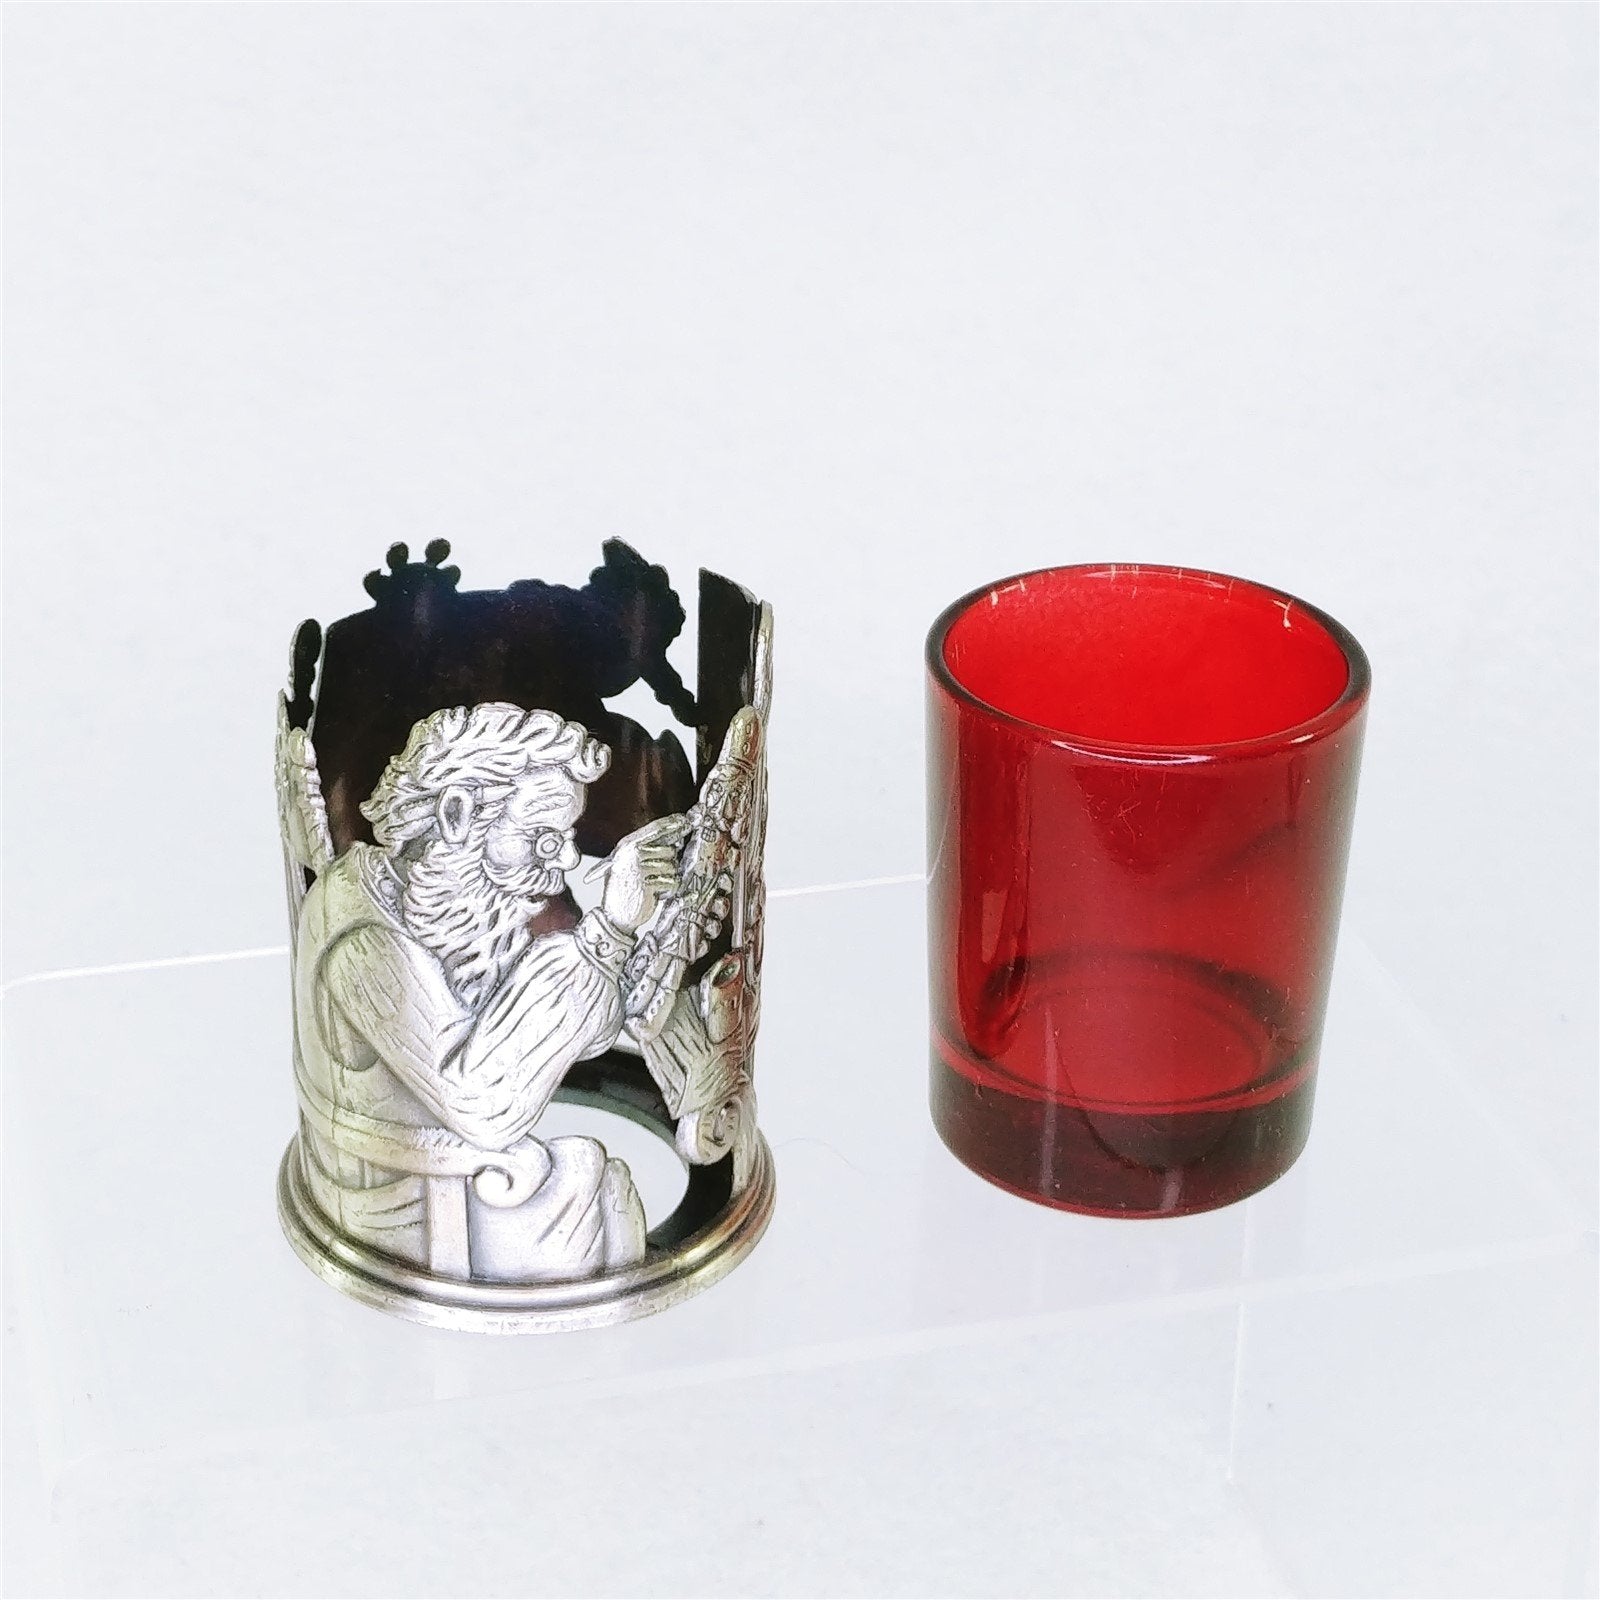 Votive Tea Light Candle Holder With Ruby Glass Insert Santa Claus In Workshop